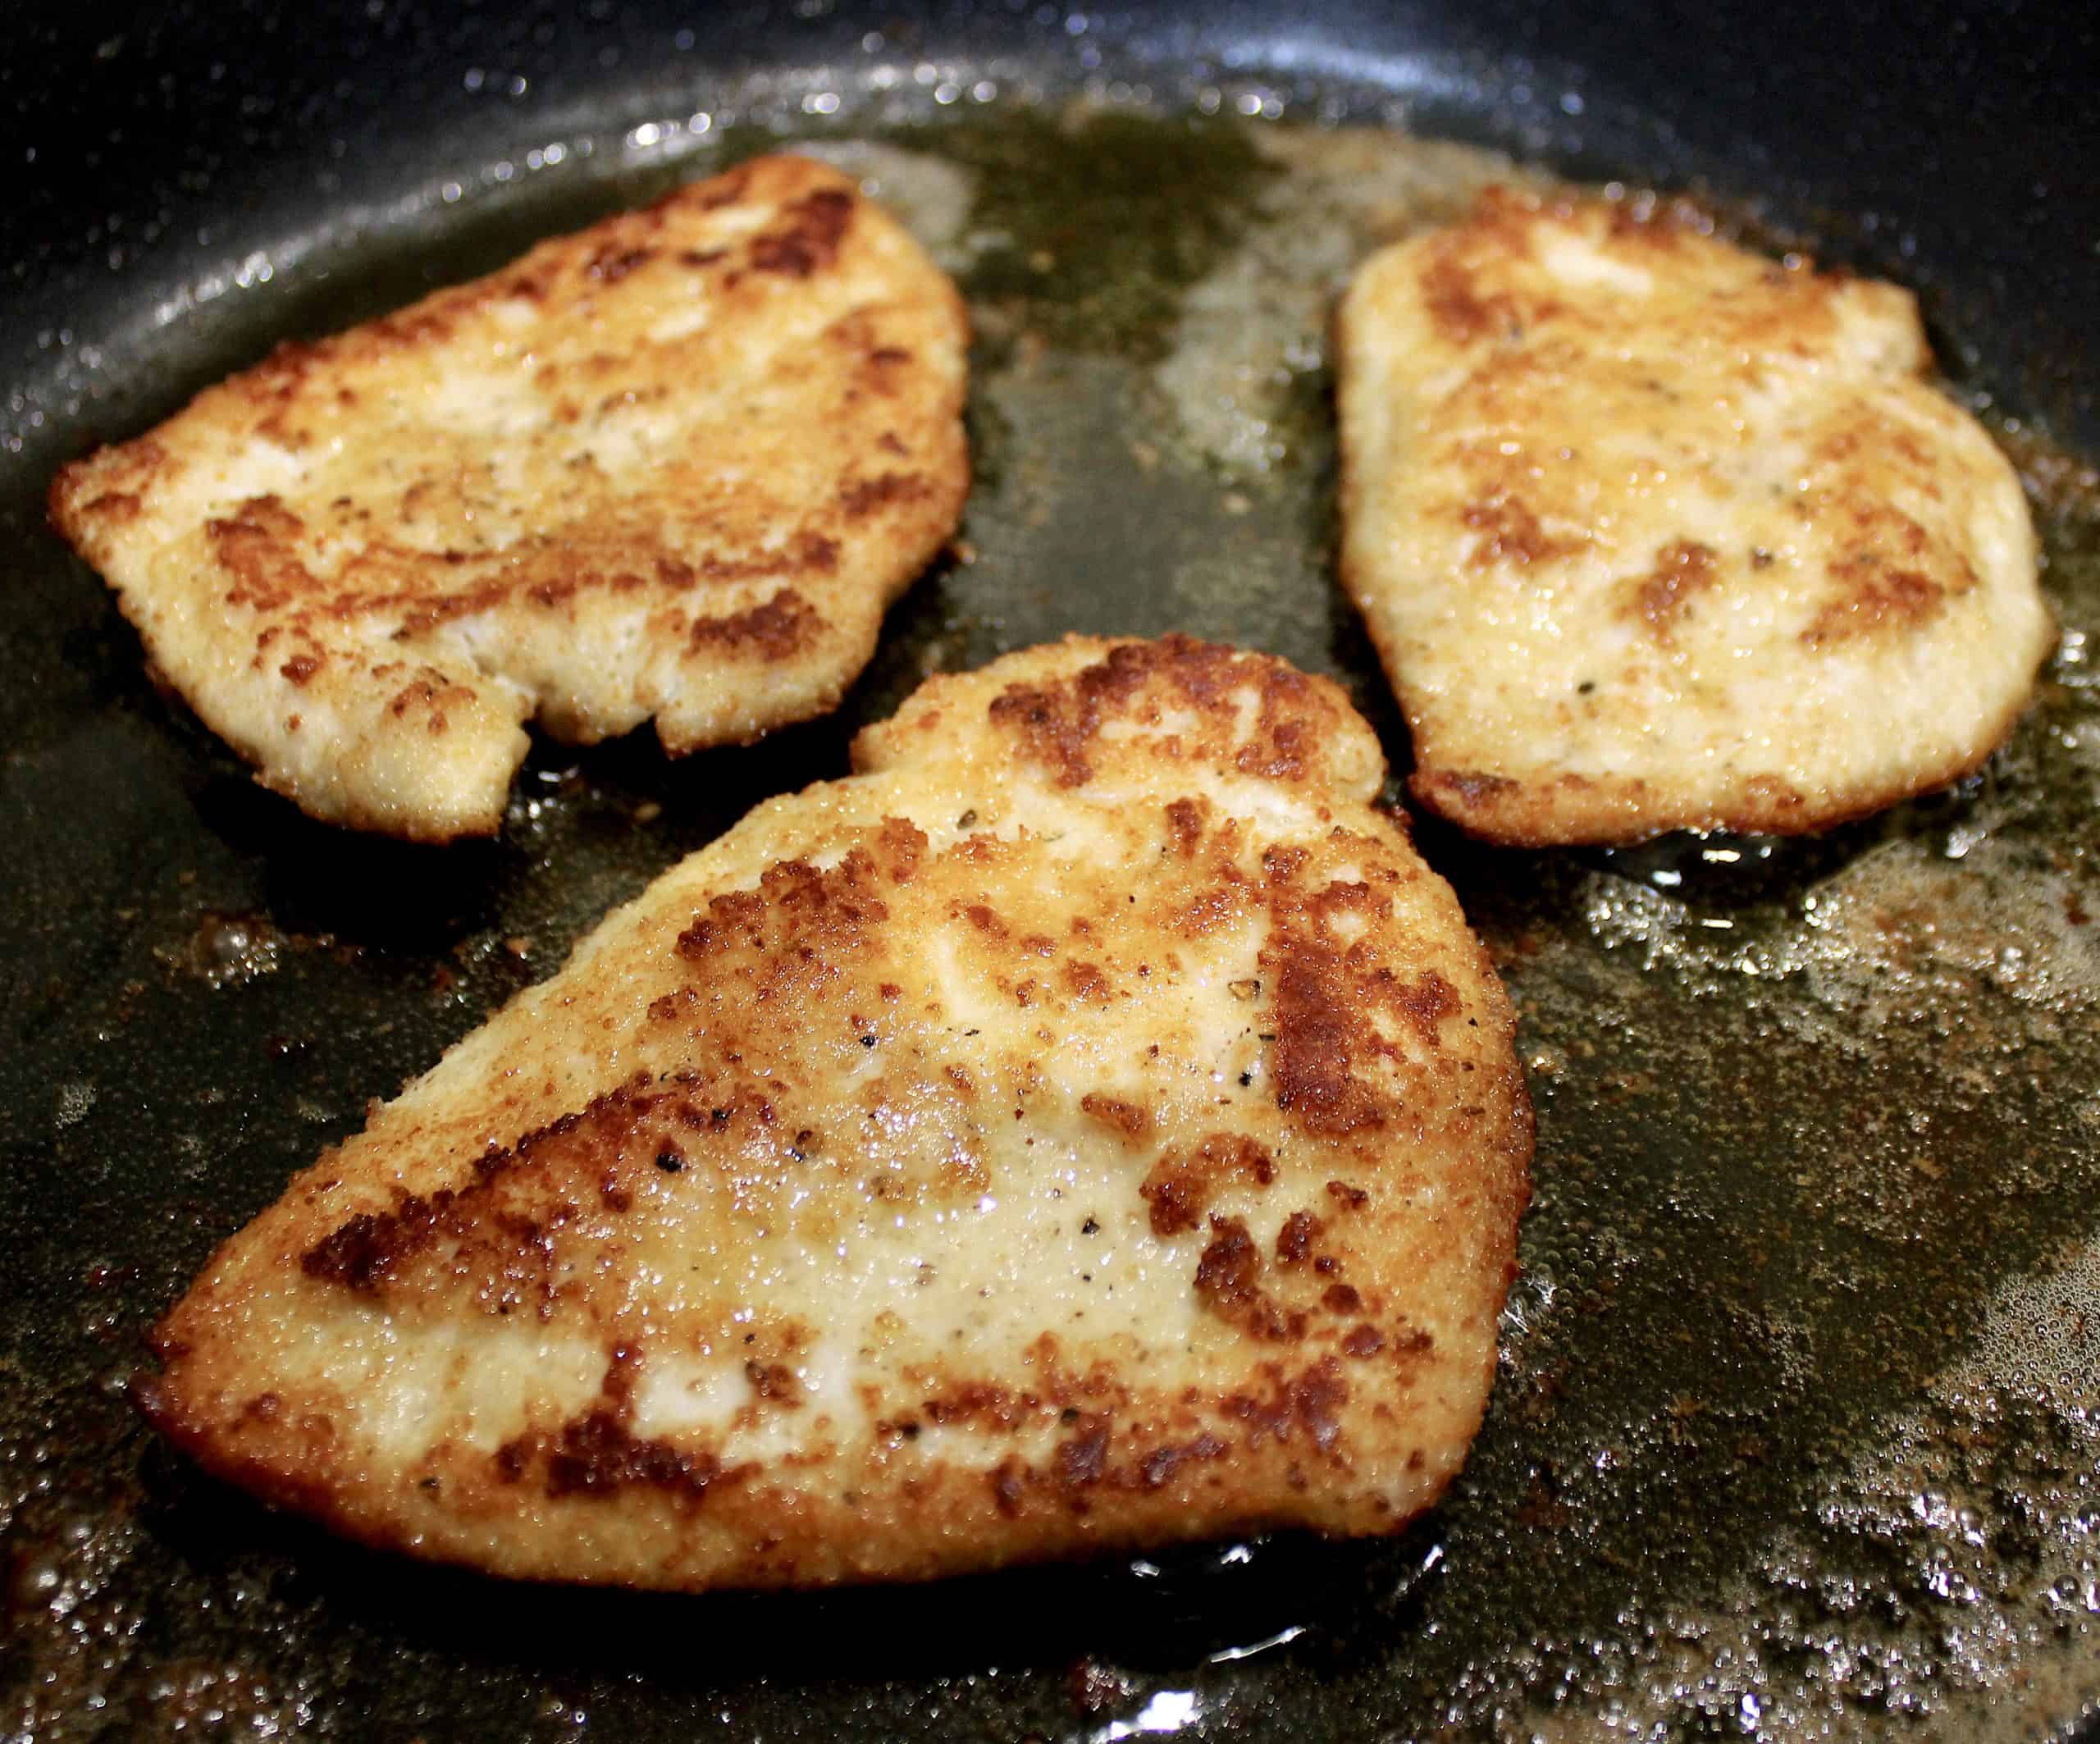 3 cooked chicken breasts in skillet